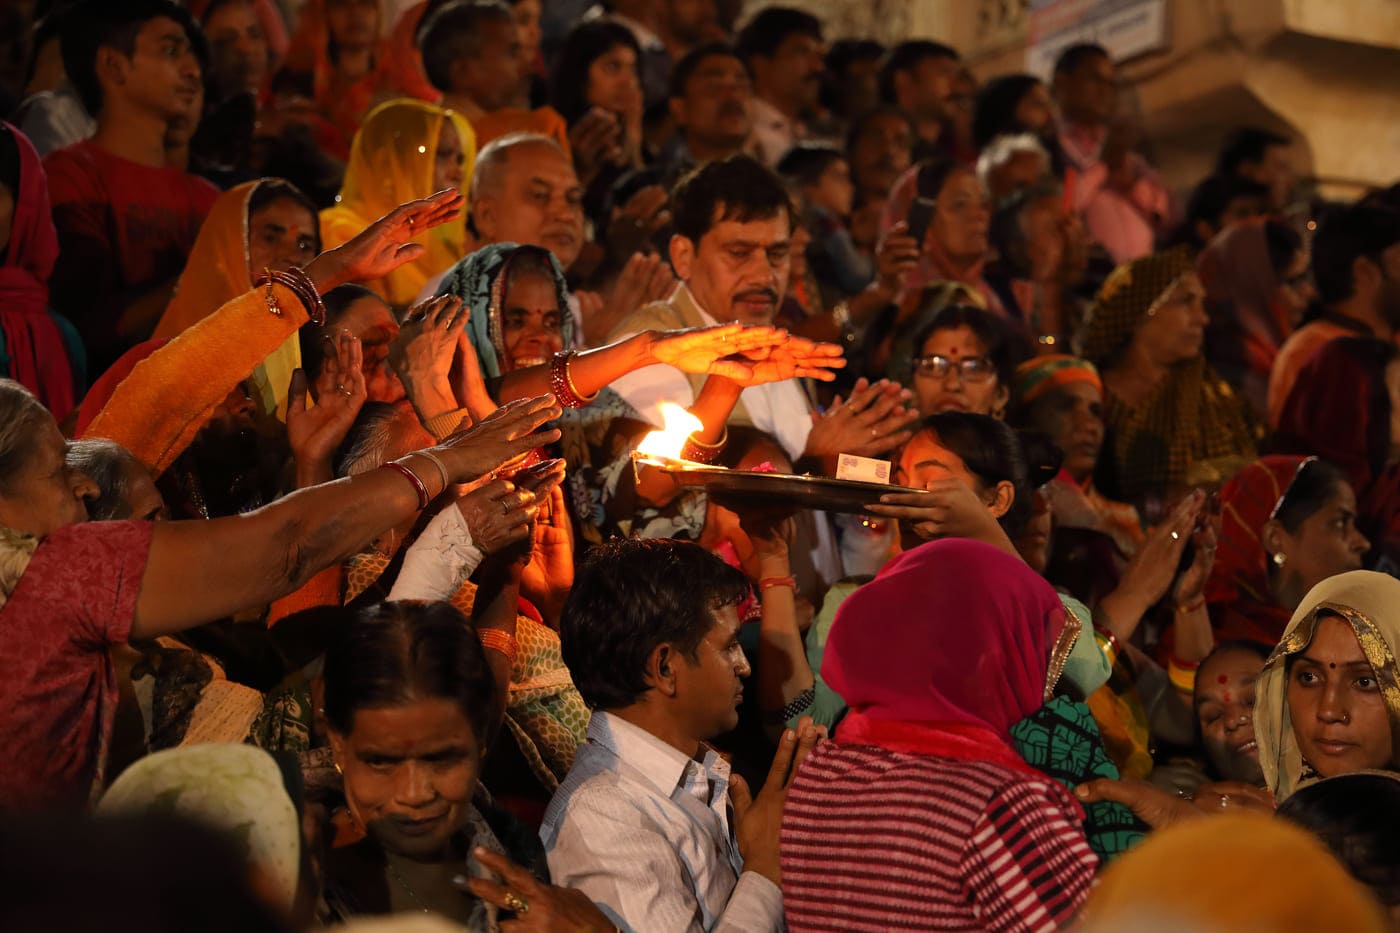 People throng around the priest to receive the Maha Aarti blessing at the Varaha ghat. It is customary to offer the priests compensation in the form of a small amount of money at such occasions